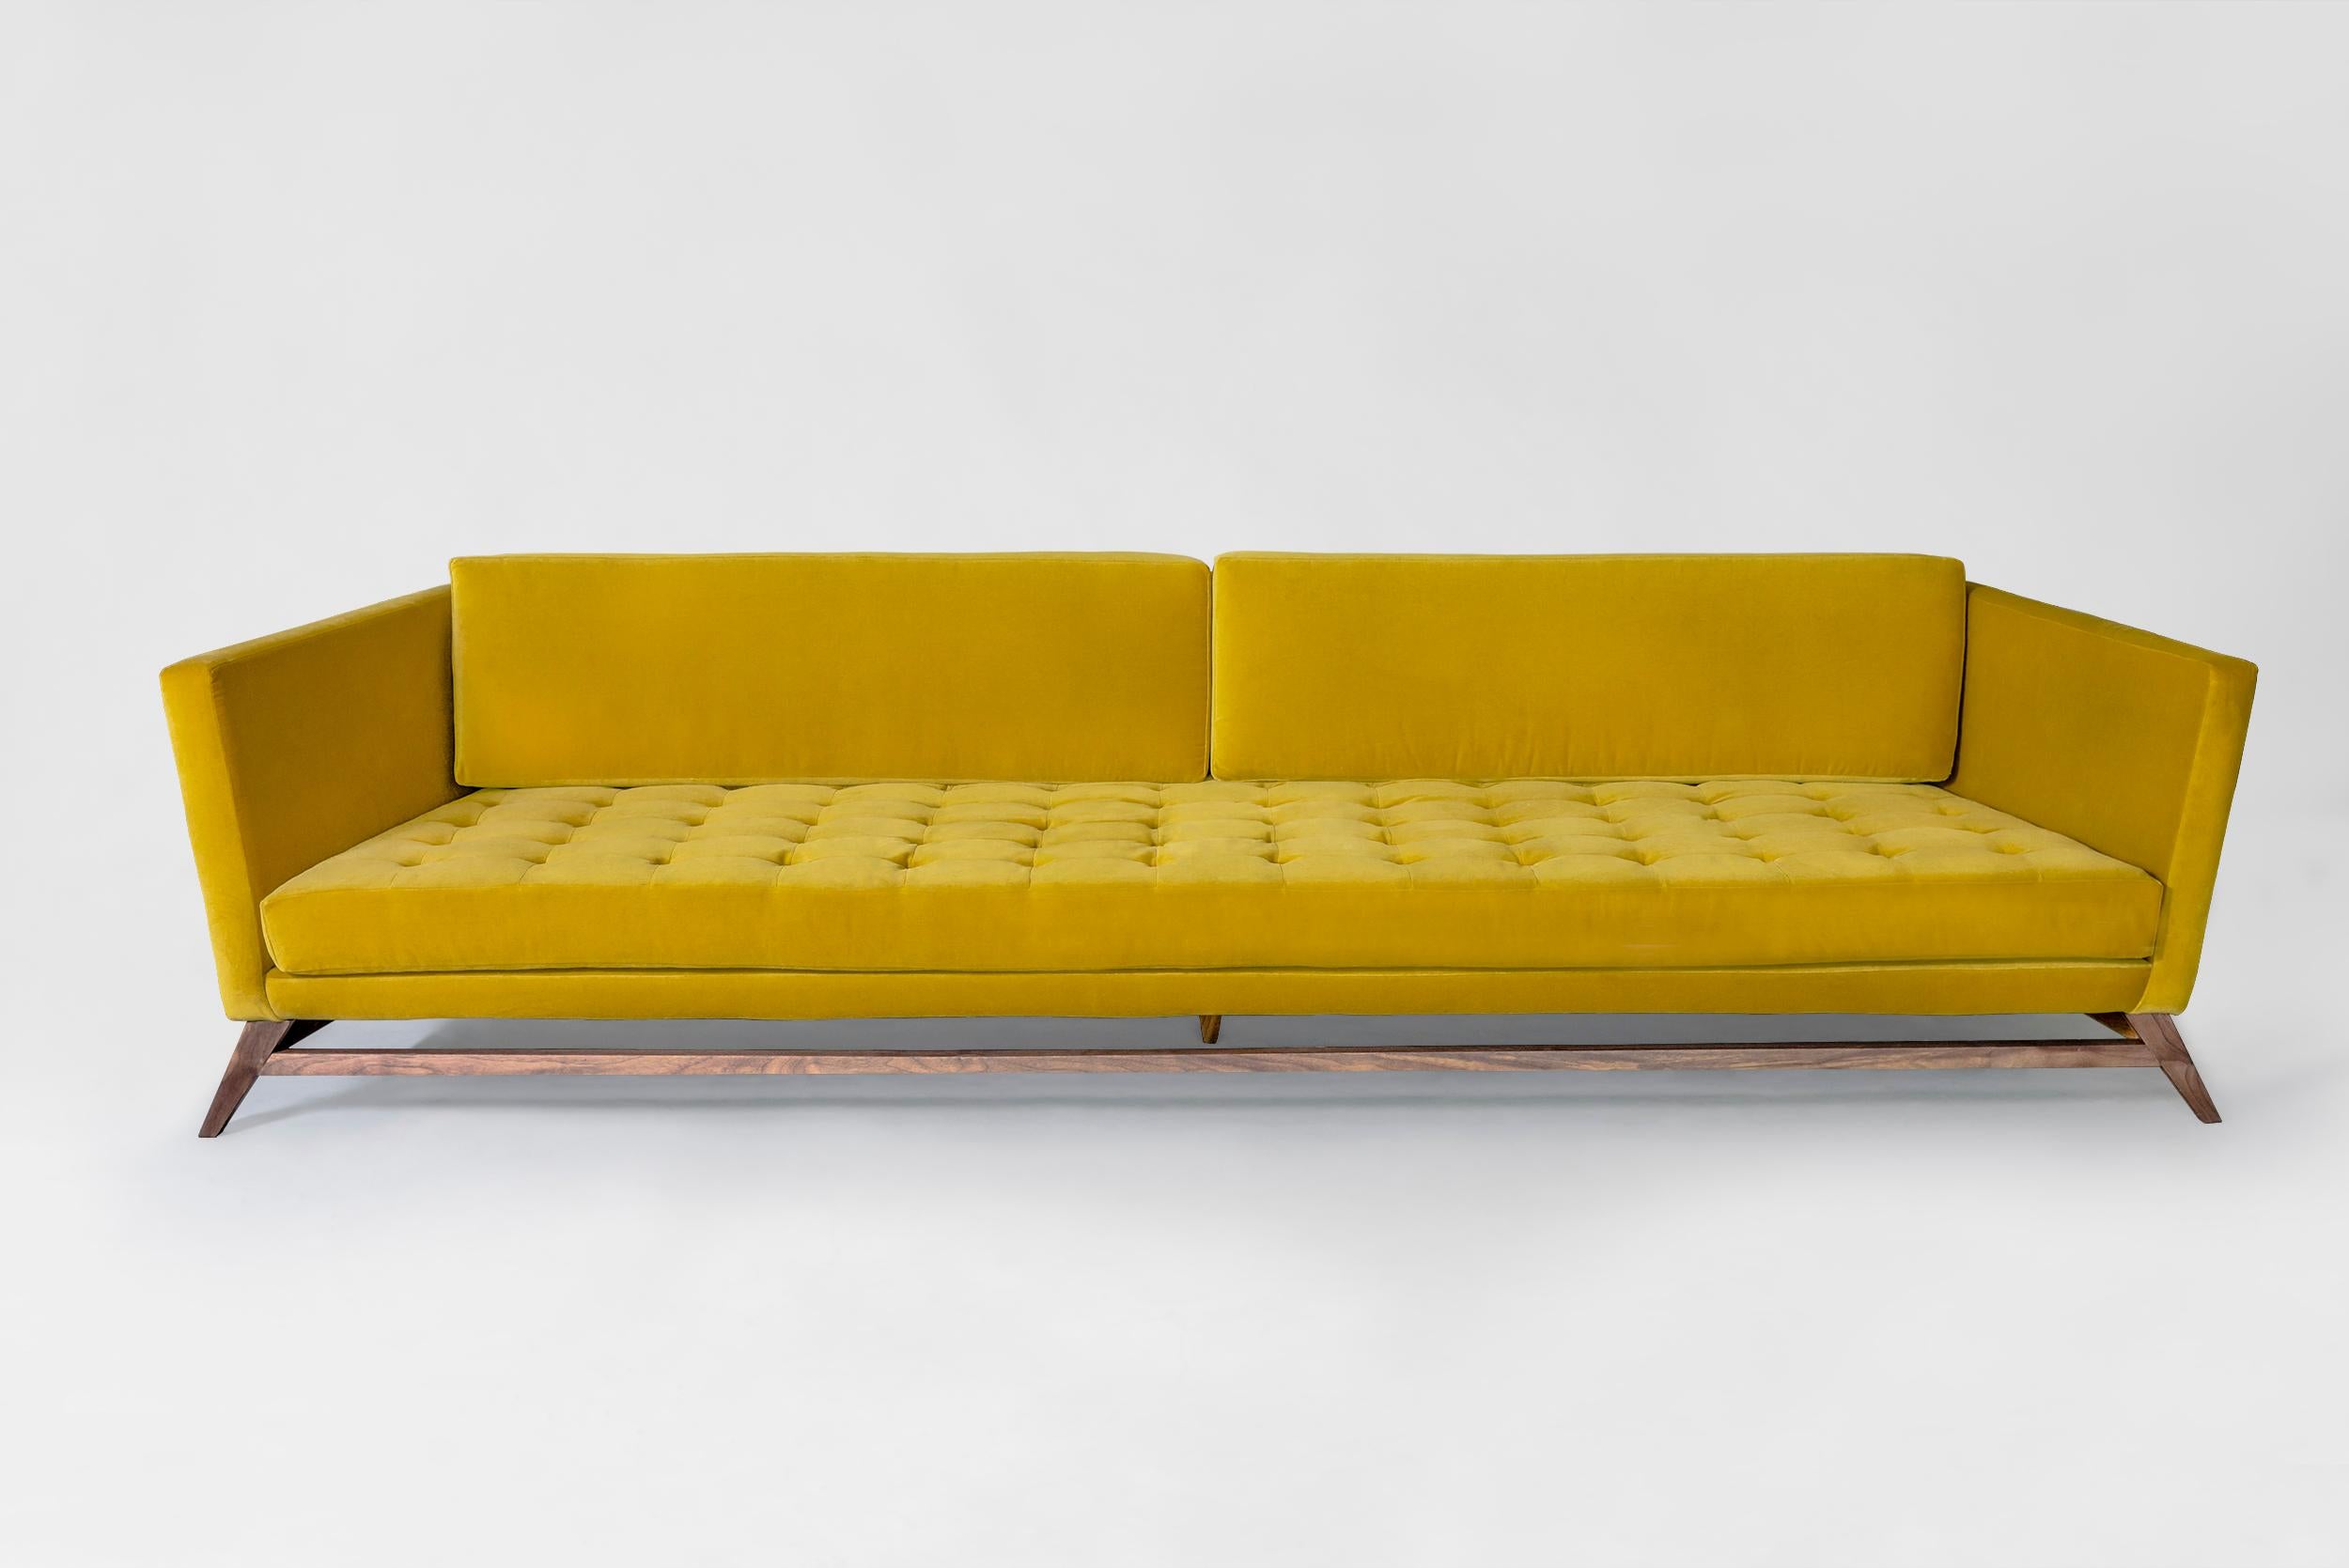 Yellow Eclipse sofa by Atra Design
Dimensions: D 220 x W 108.8 x H 79 cm
Materials: fabric, walnut wood
Available in other colors.

Atra Design
We are Atra, a furniture brand produced by Atra form a mexico city–based high end production